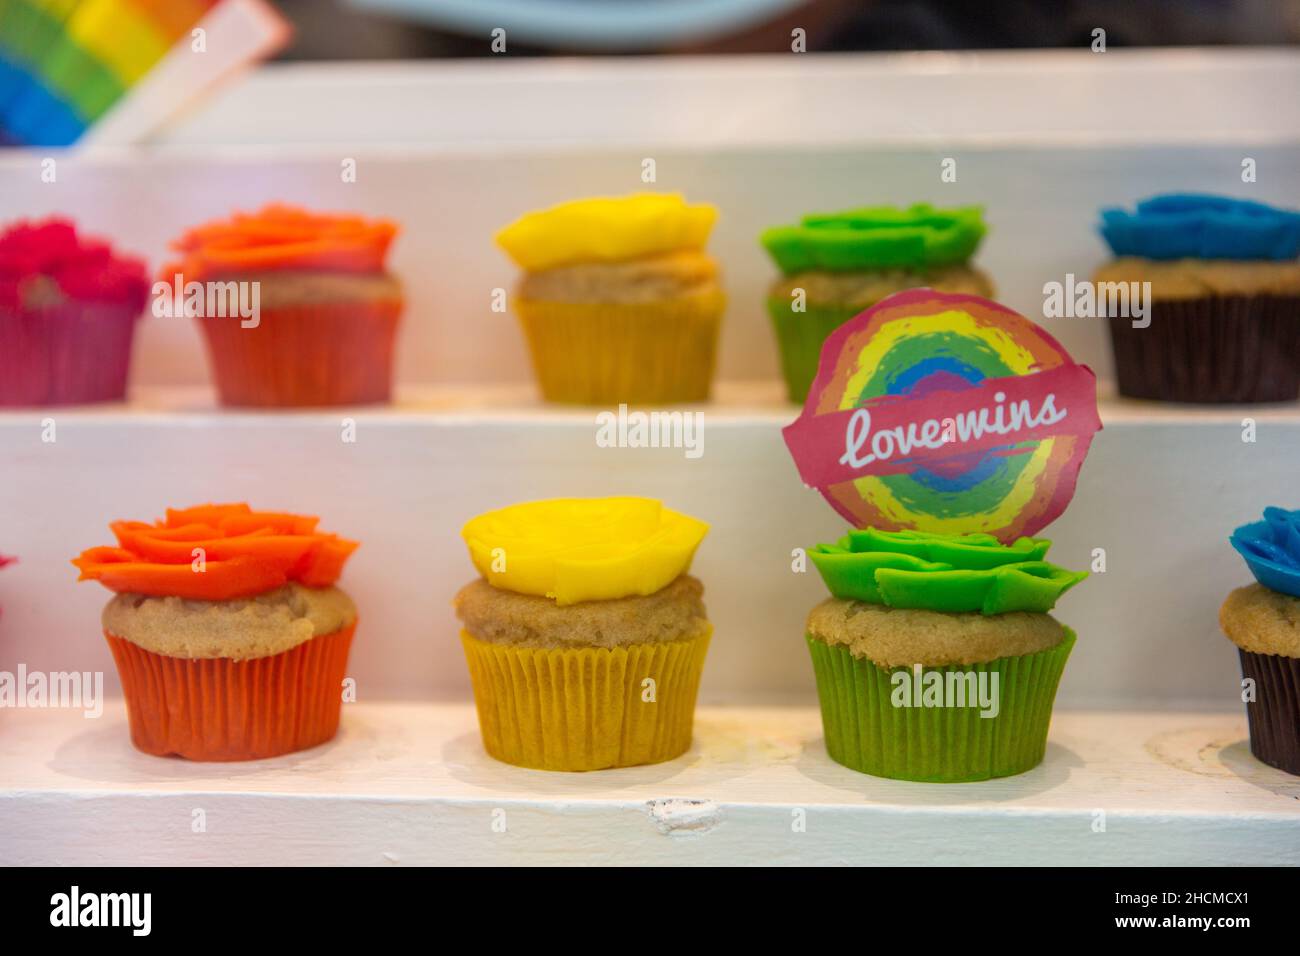 Multi-colored cupcakes for St. Valentine's Day; Love wins Stock Photo